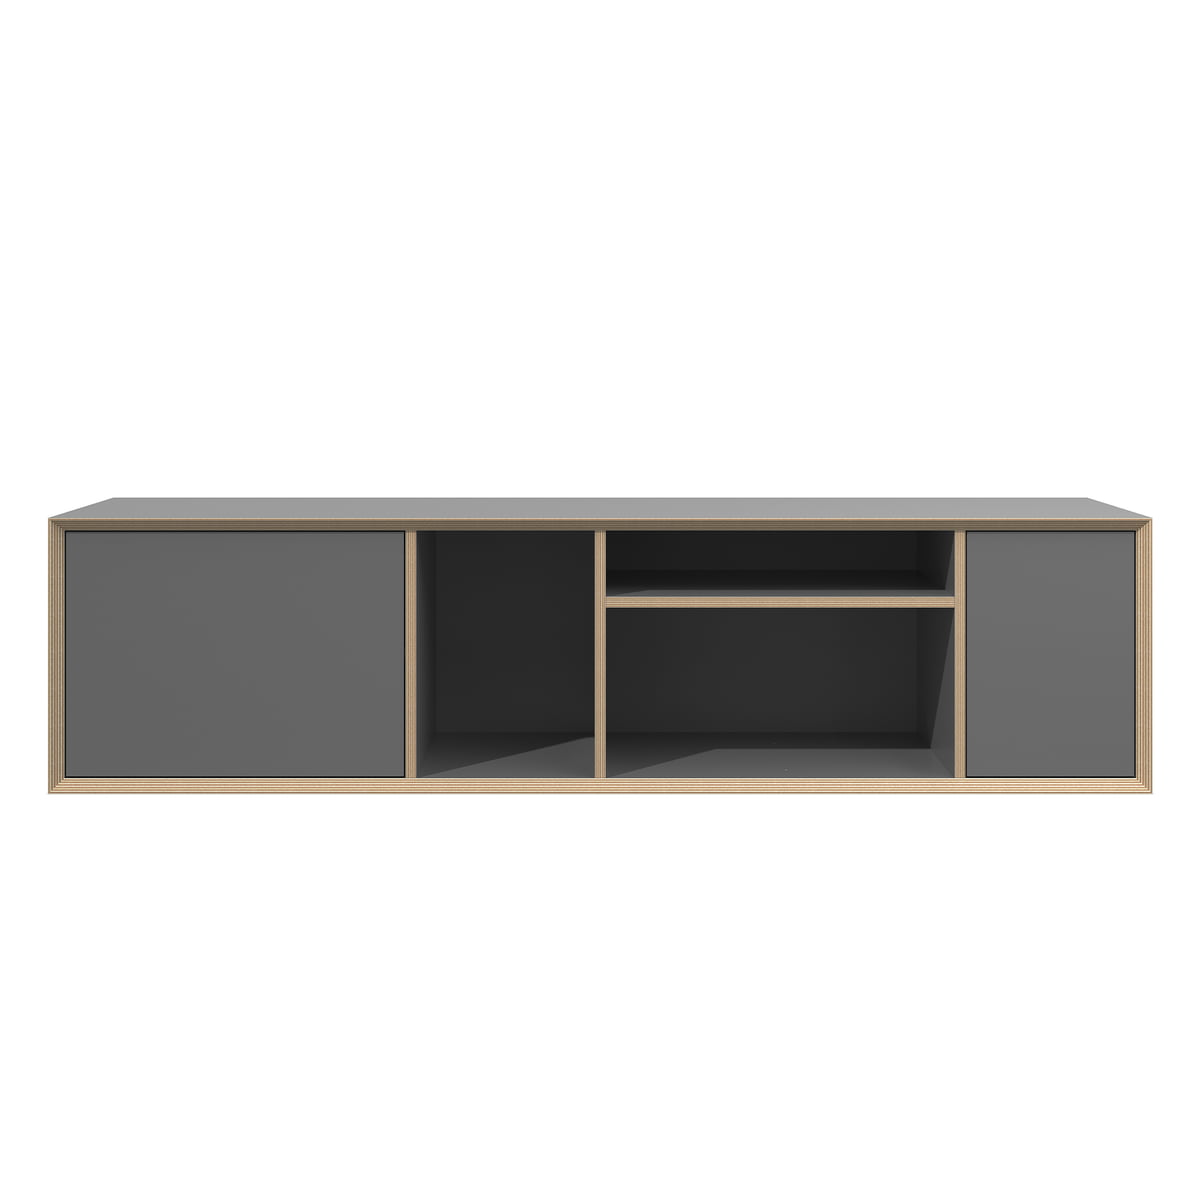 Müller Small Living - Vertiko Wide Sideboard Connox 